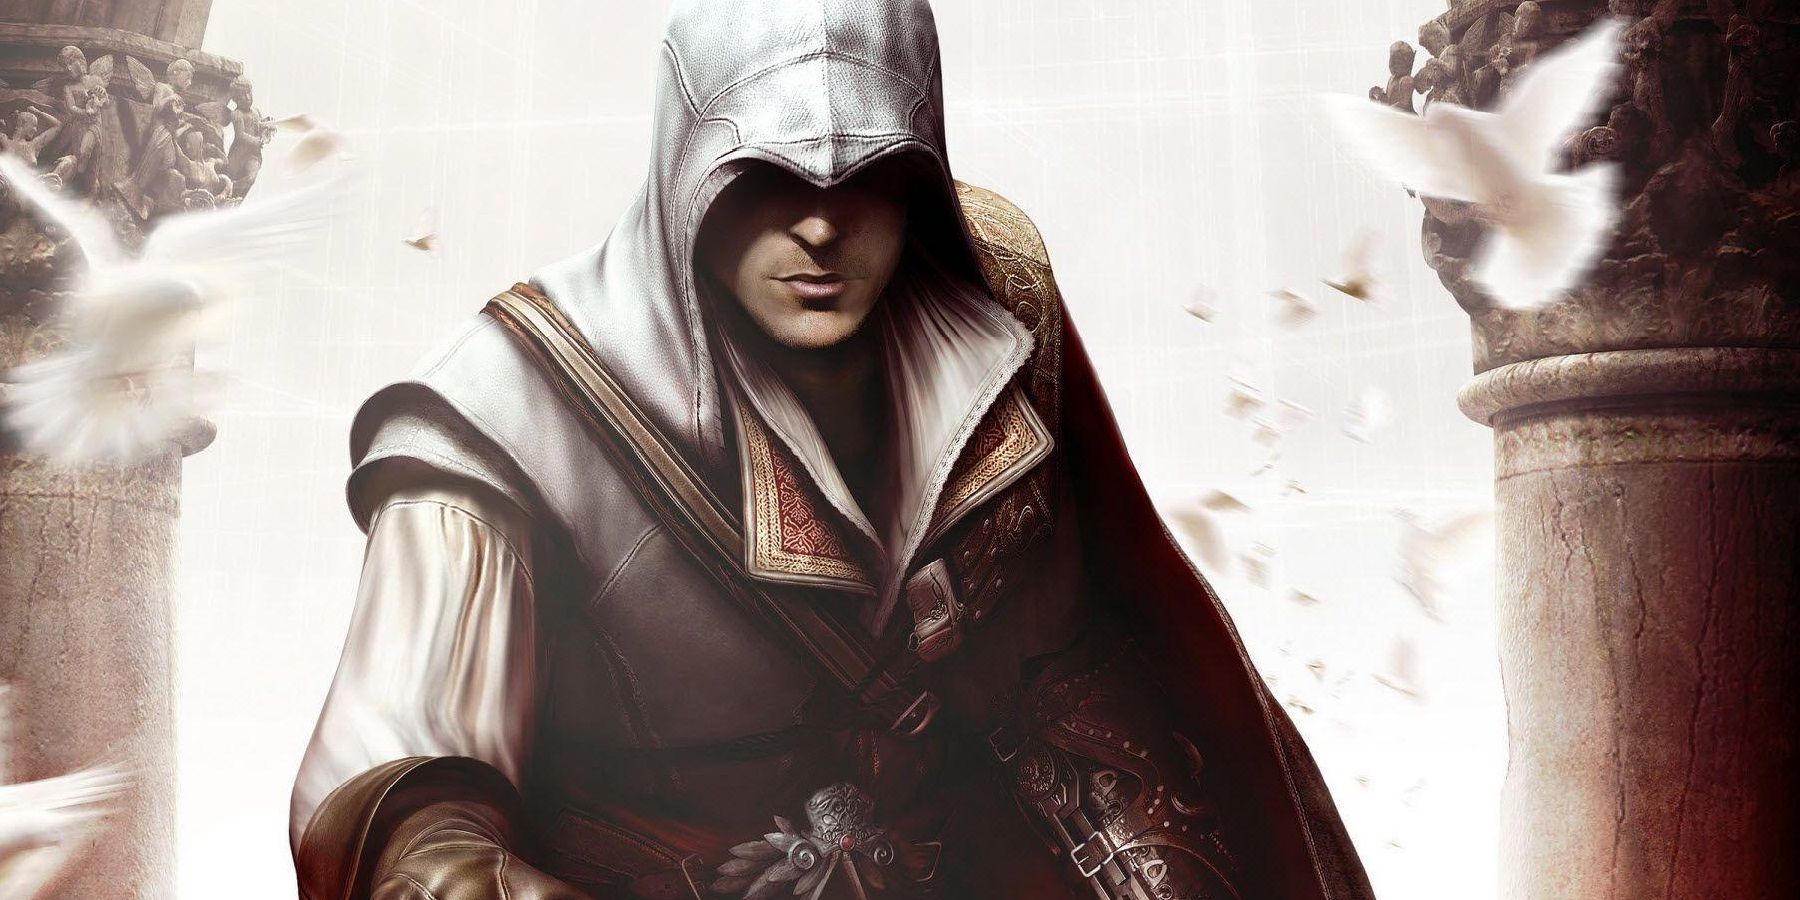 Here is what an Assassin's Creed 2 Remake could look in Unreal